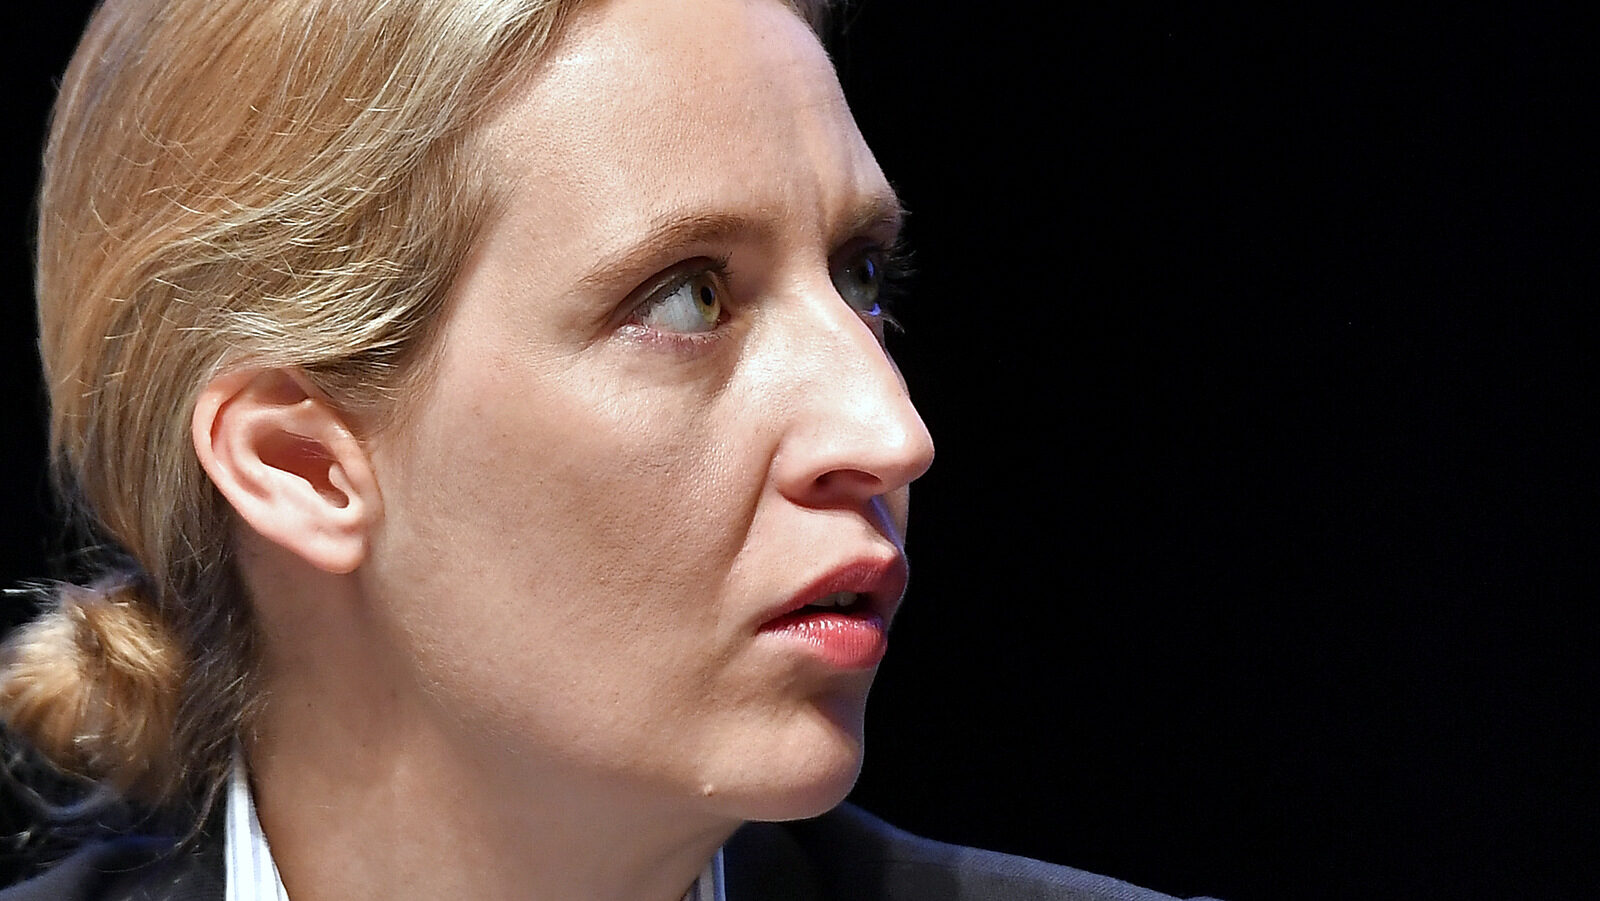 Alice Weidel watches from the podium at the party convention of Germany's far-right nationalist party AfD (Alternative for Germany) in Cologne, Germany, April 22, 2017. (AP/Martin Meissner)